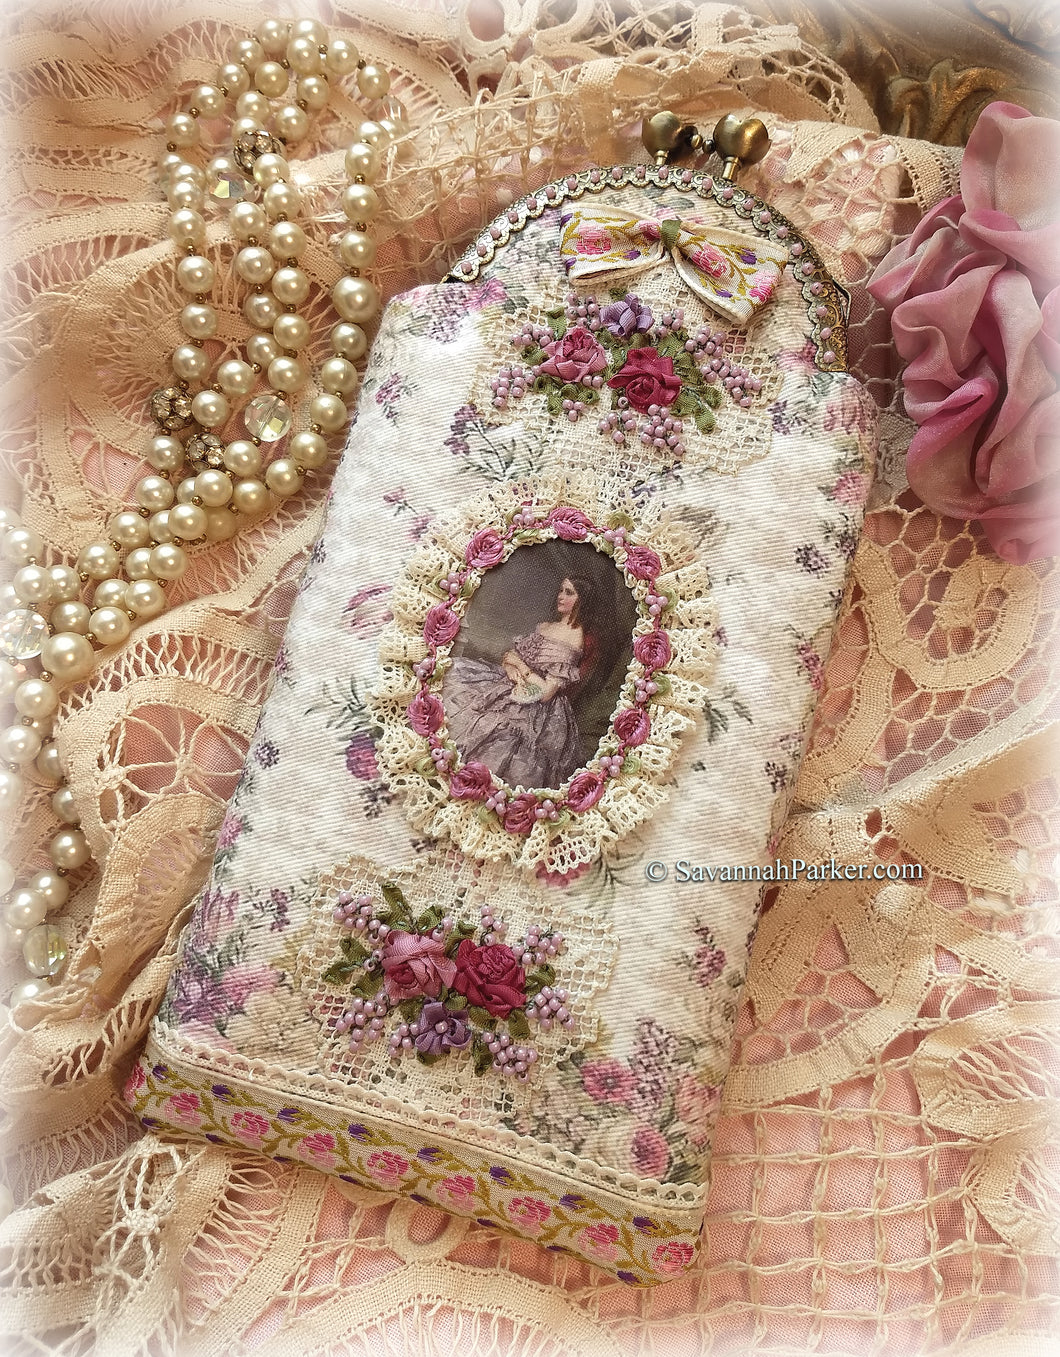 SOLD OUT Exquisite Handmade Victorian Ribbonwork Roses Phone Case Eyeglass Case Pouch, Silk Ribbon Embroidery Purse, Cell Case, Glasses Case